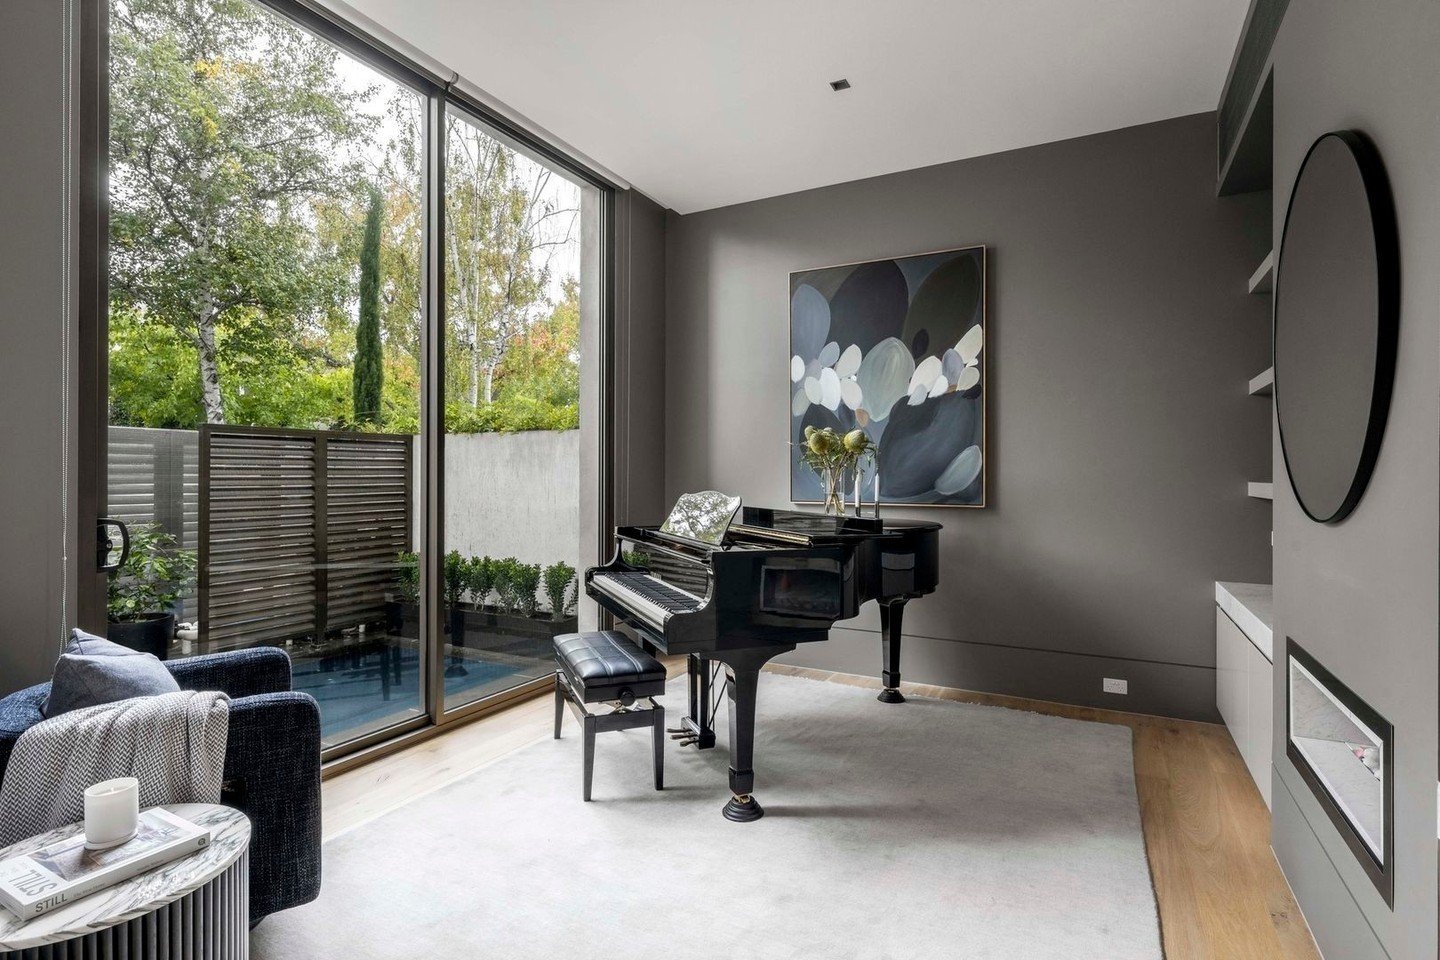 Charcoal grey walls are the perfect tone for this music room.⁠
Moody and contemplative. Styling was kept minimal and focused.⁠
⁠
Styling | @cooperrobinsoninteriors⁠
Stylist | @neilmitchell⁠
______________⁠
⁠
1B Cleeve Court ⁠
Toorak⁠
______________⁠
